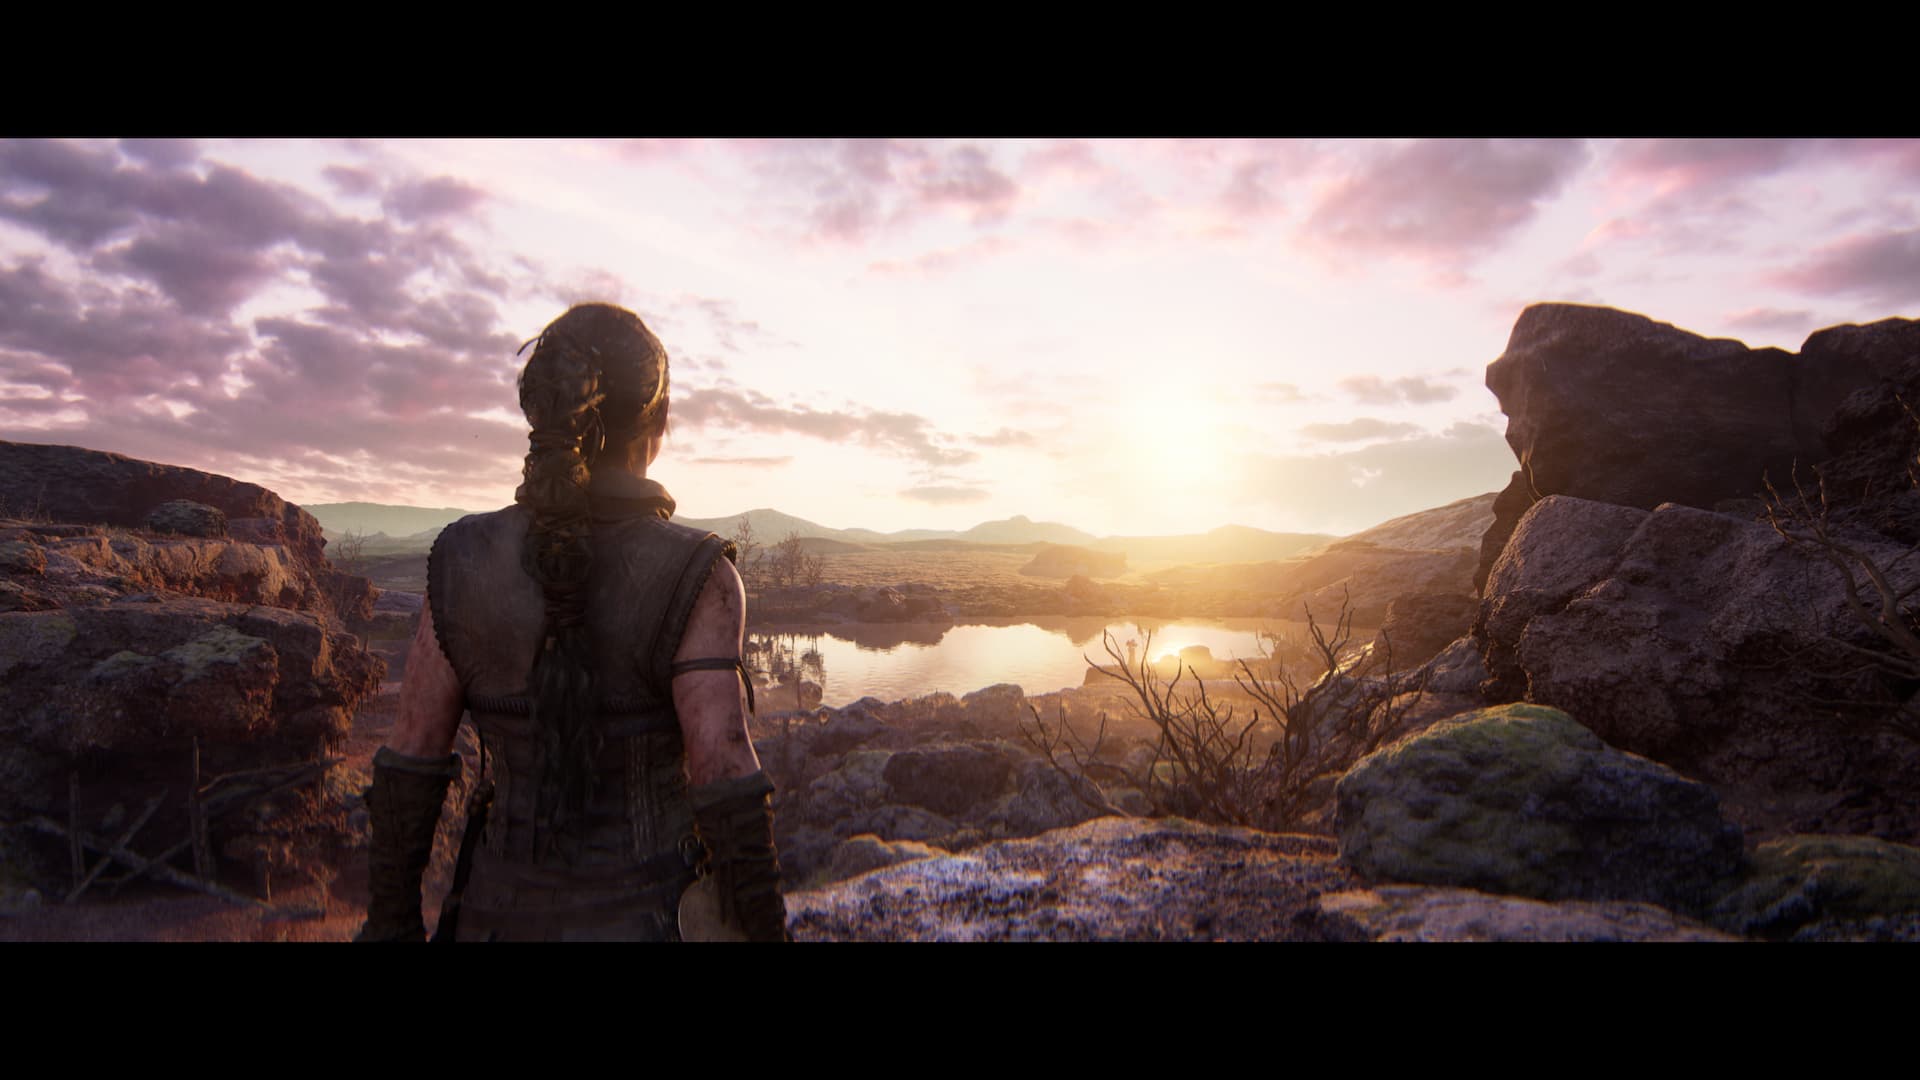 Senua looking over a picturesque landscape with a lake and a sunset